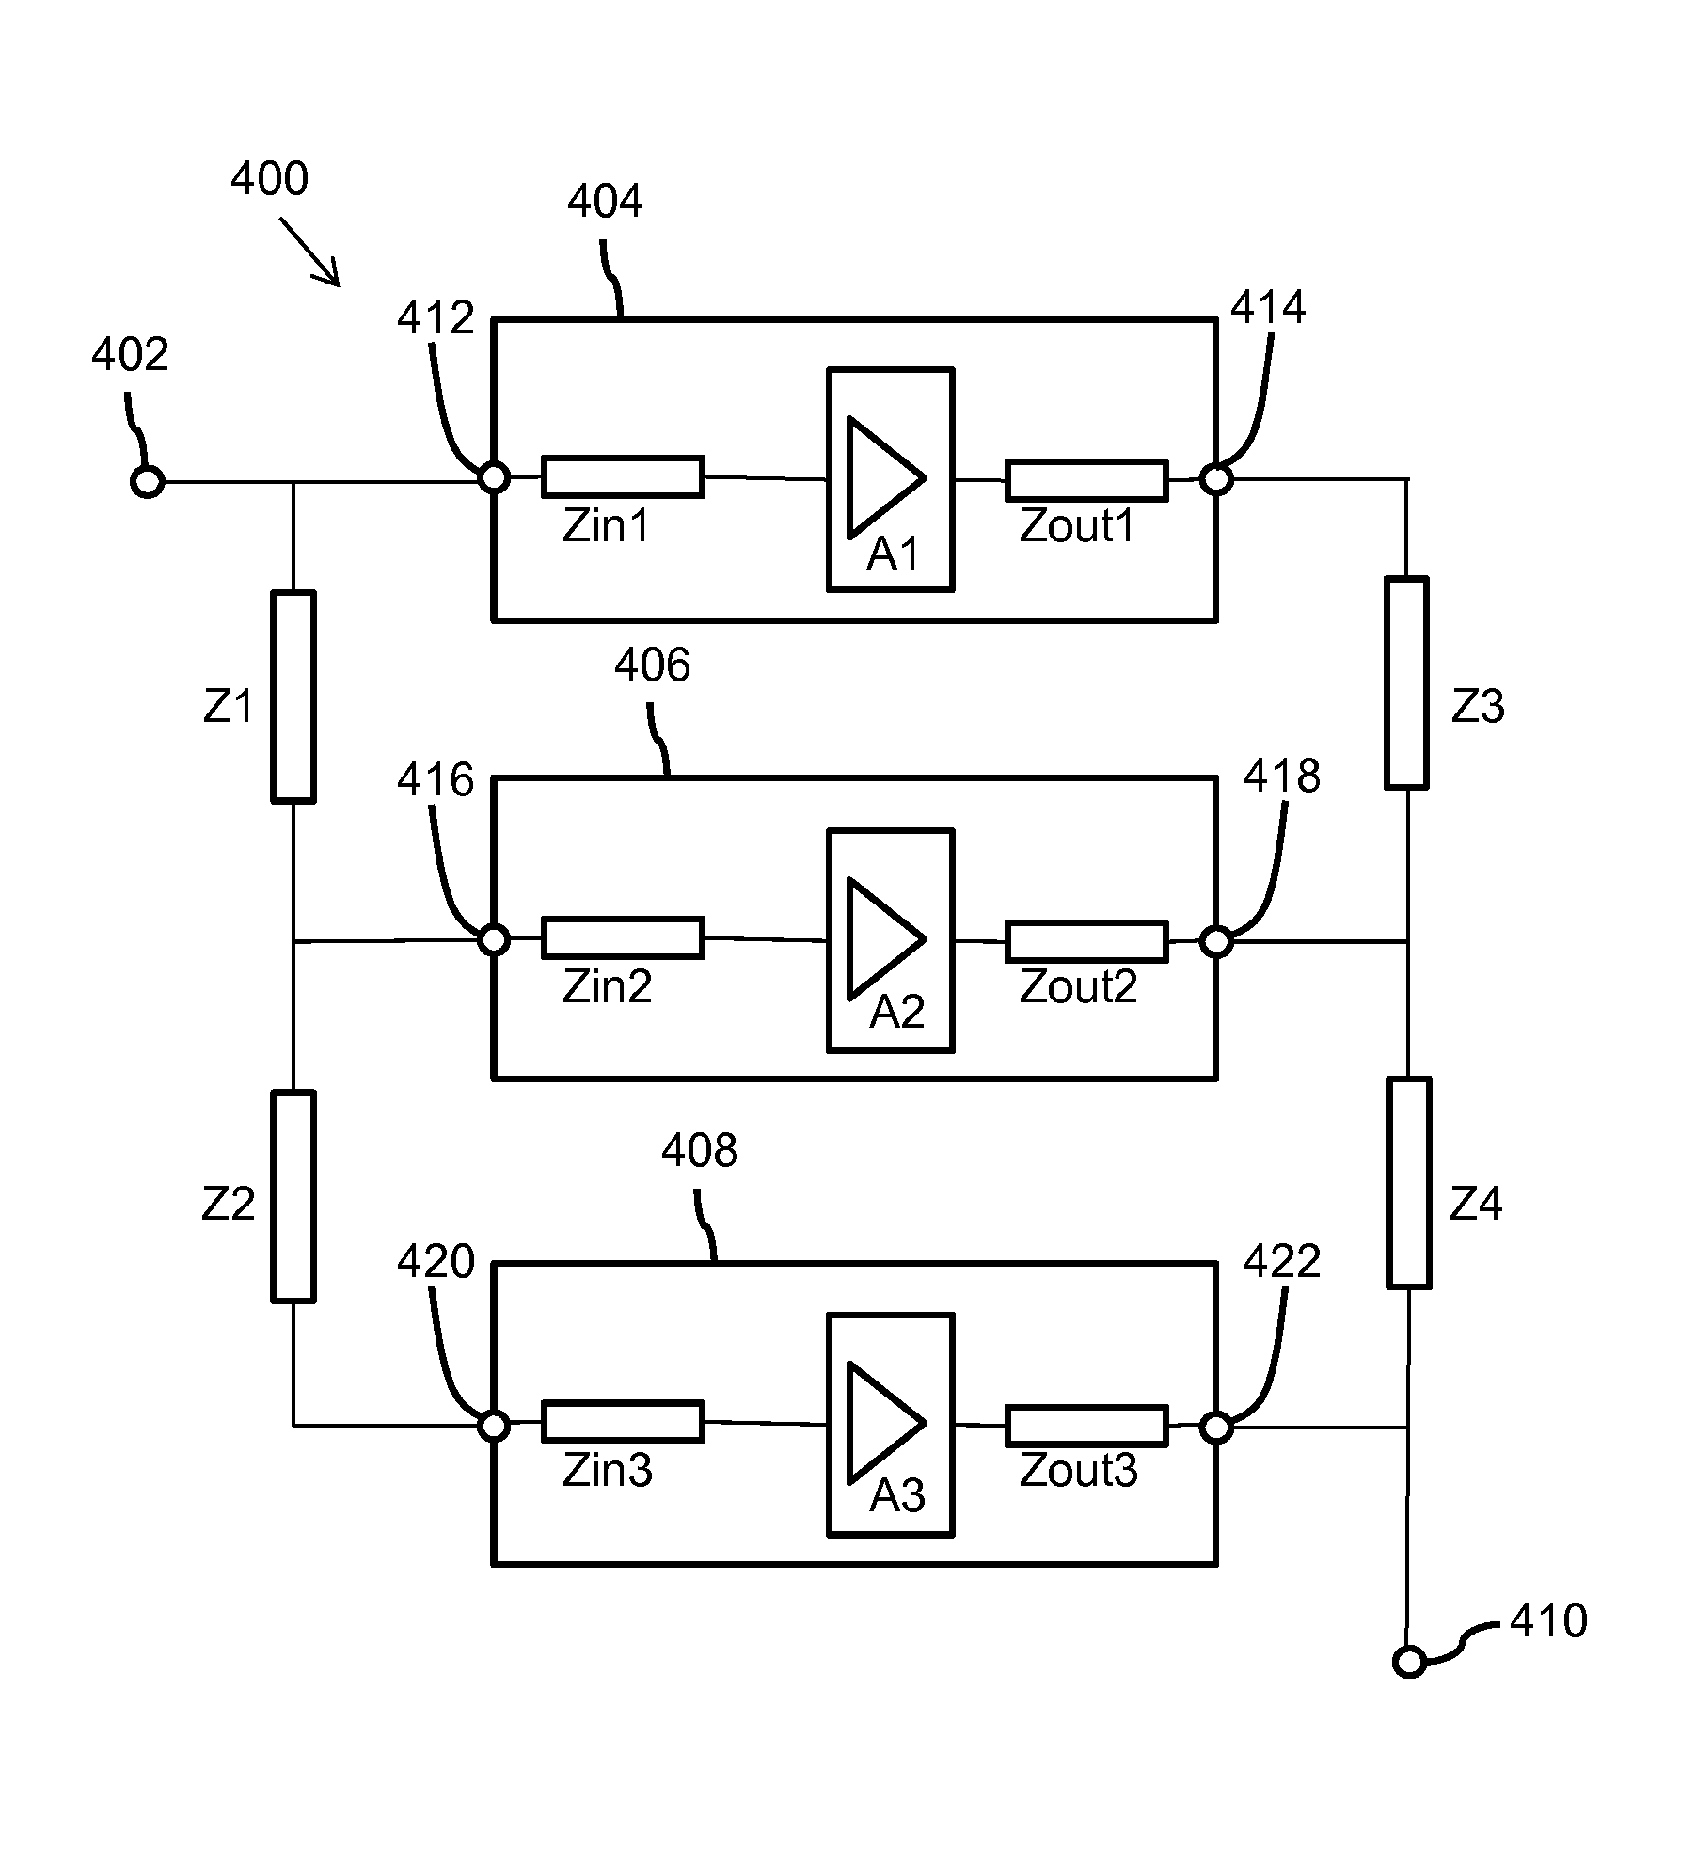 Amplification stage and wideband power amplifier